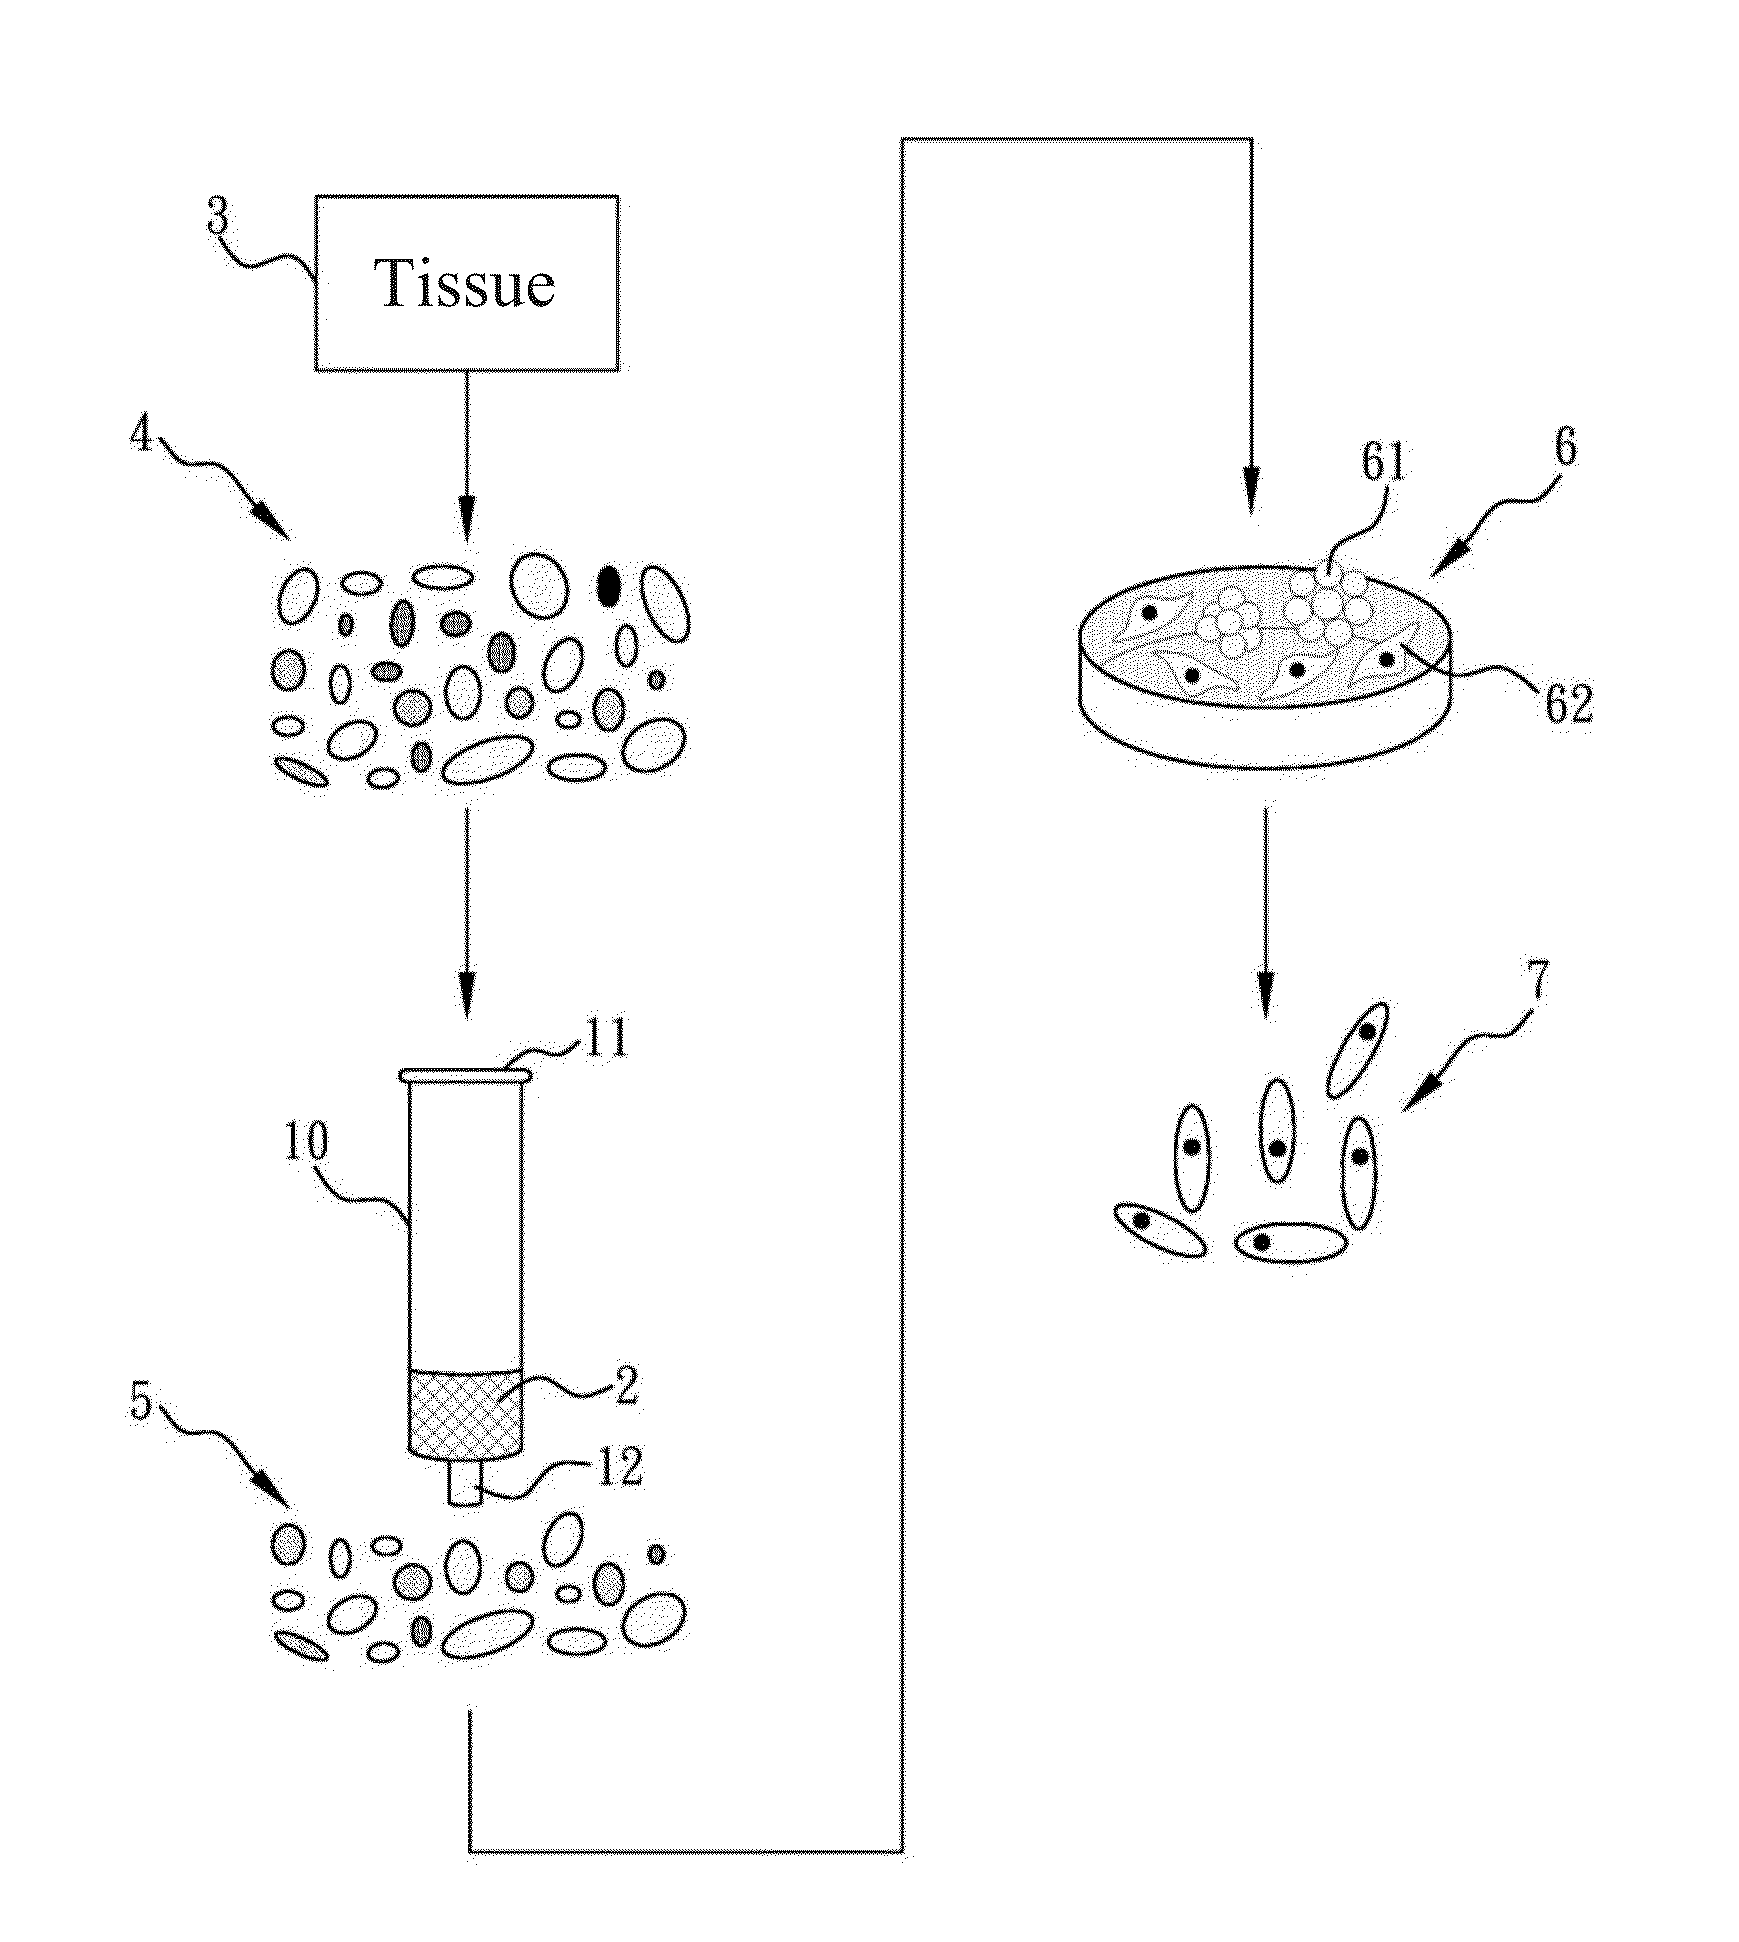 Method of obtaining high purity stem cells from tissue